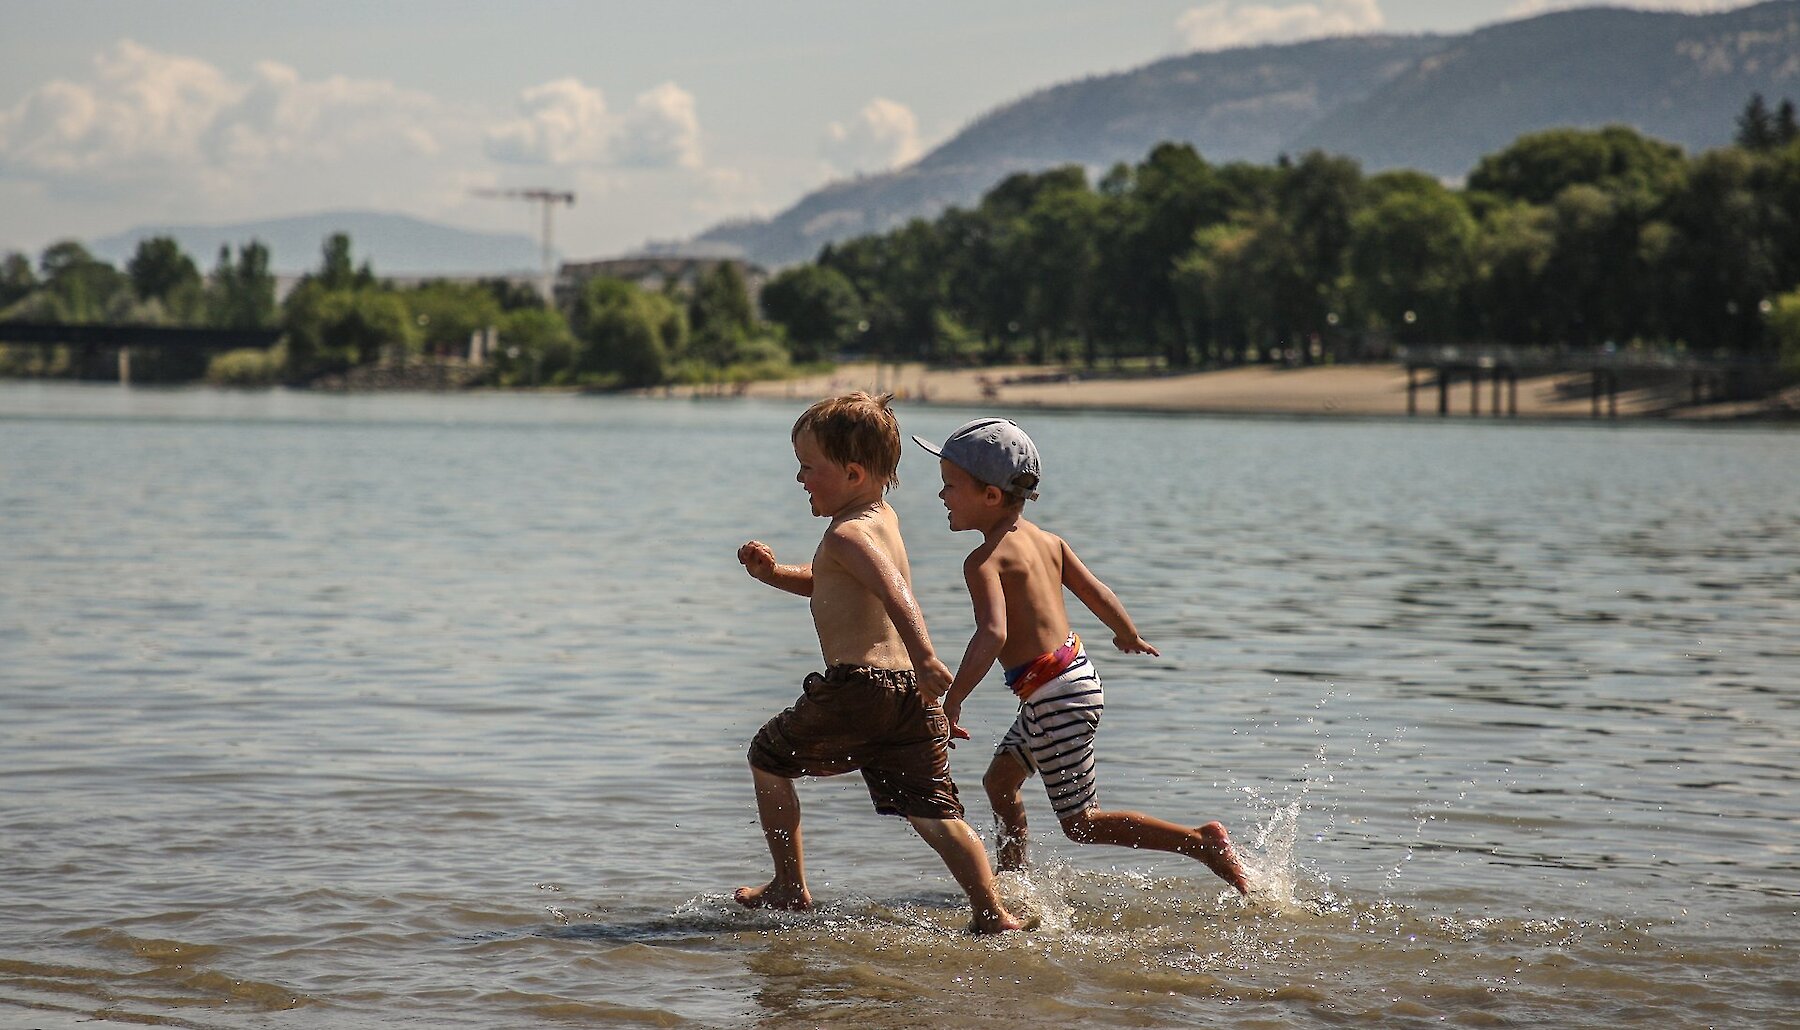 Two boys running into Kamloops Lake at Overlander Beach on the North Shore in Kamloops, British Columbia.